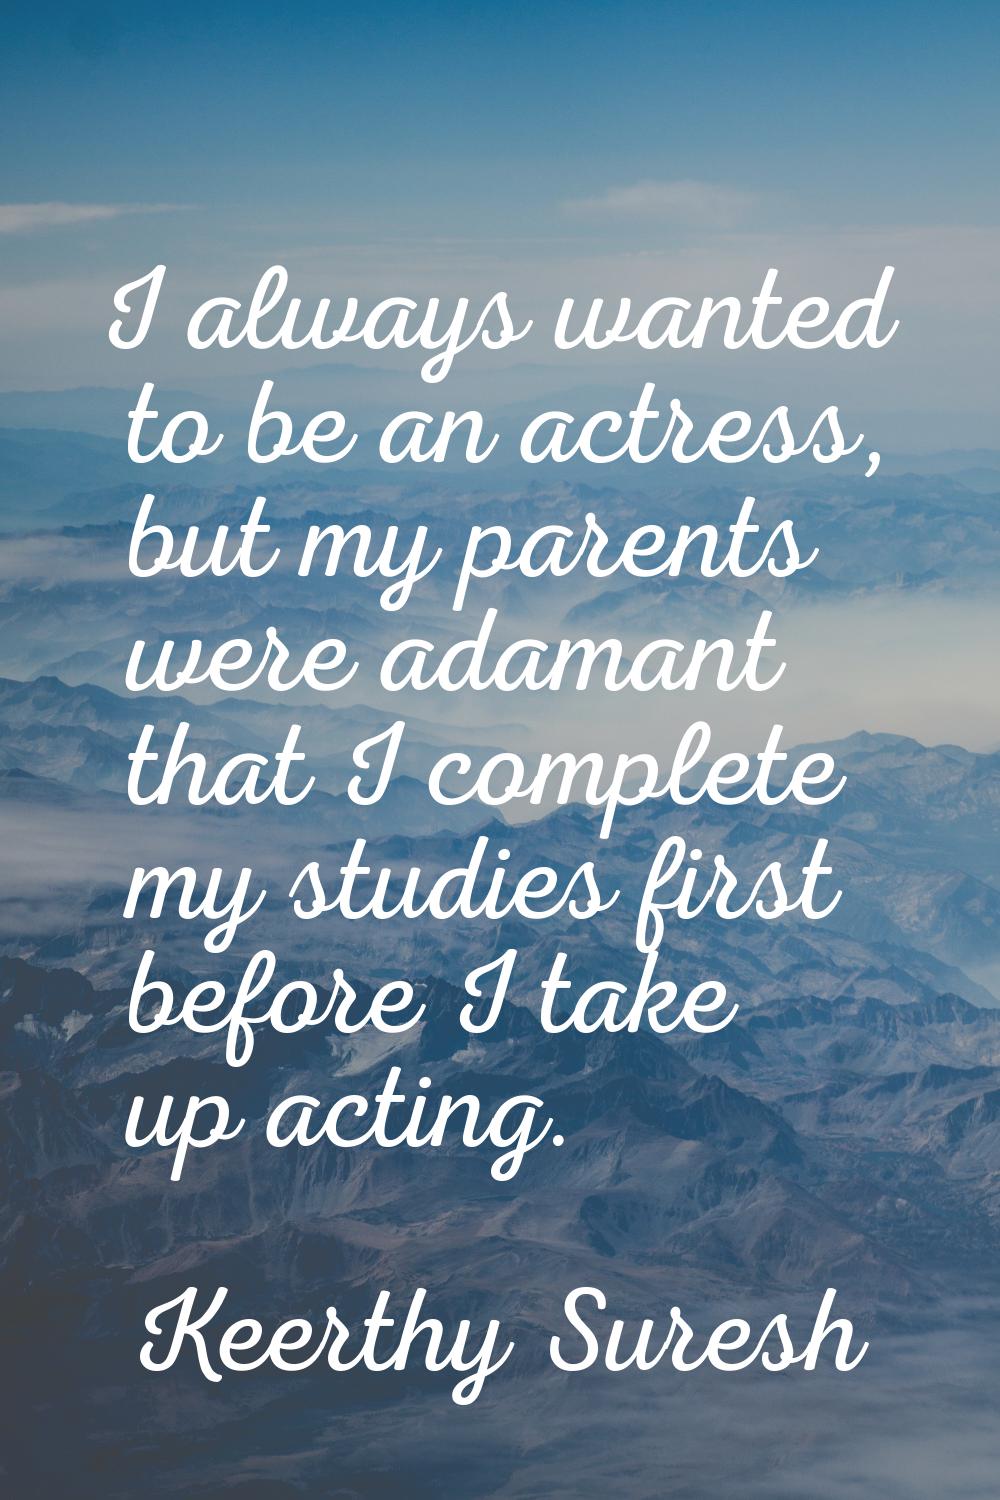 I always wanted to be an actress, but my parents were adamant that I complete my studies first befo